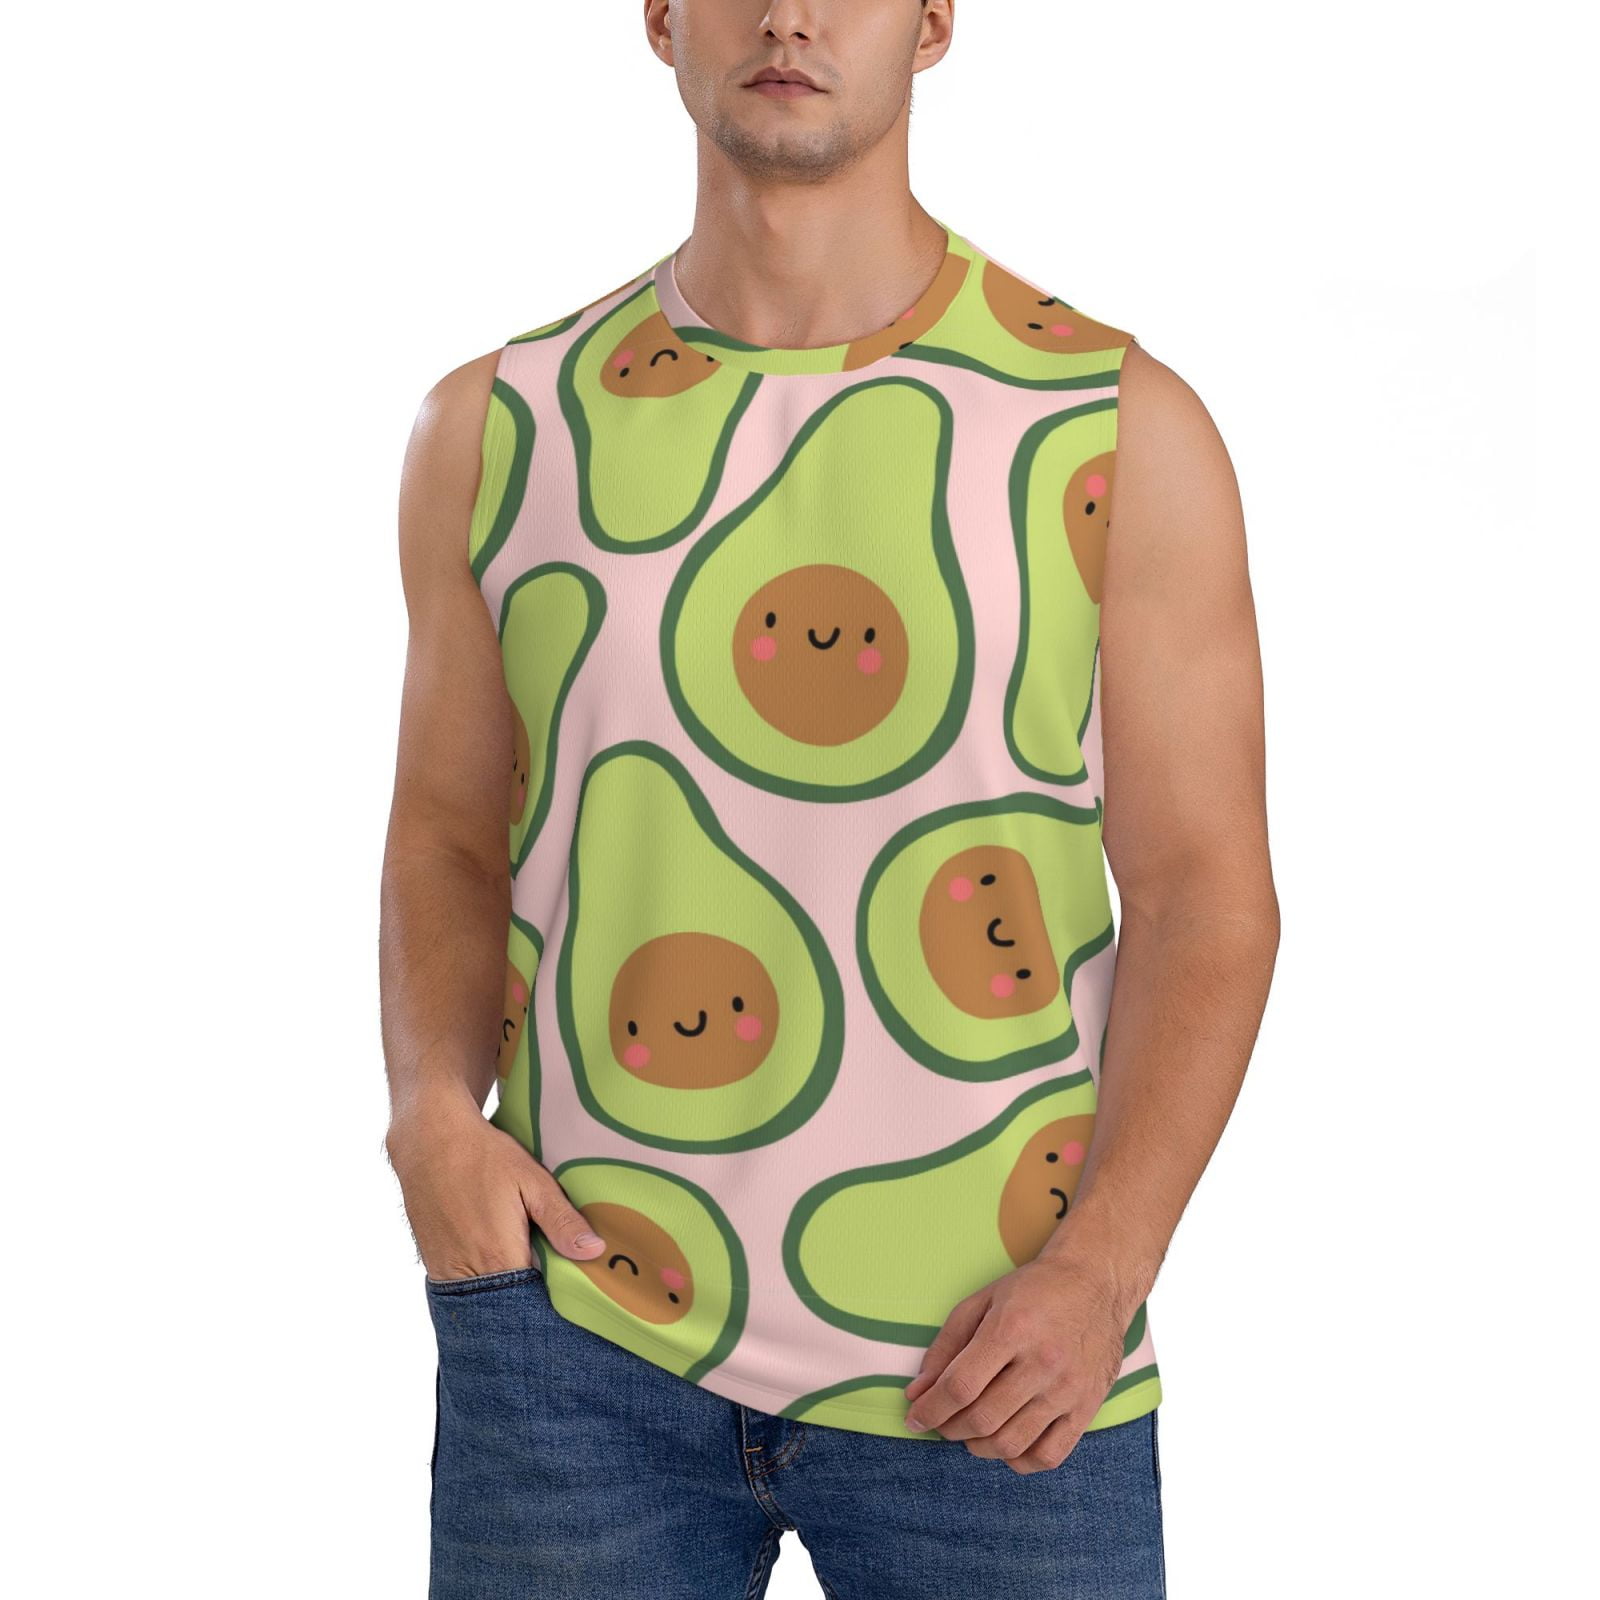 Adobk Cute Avocado Men'S Tank Top Muscle Workout Gym Shirts Casual ...